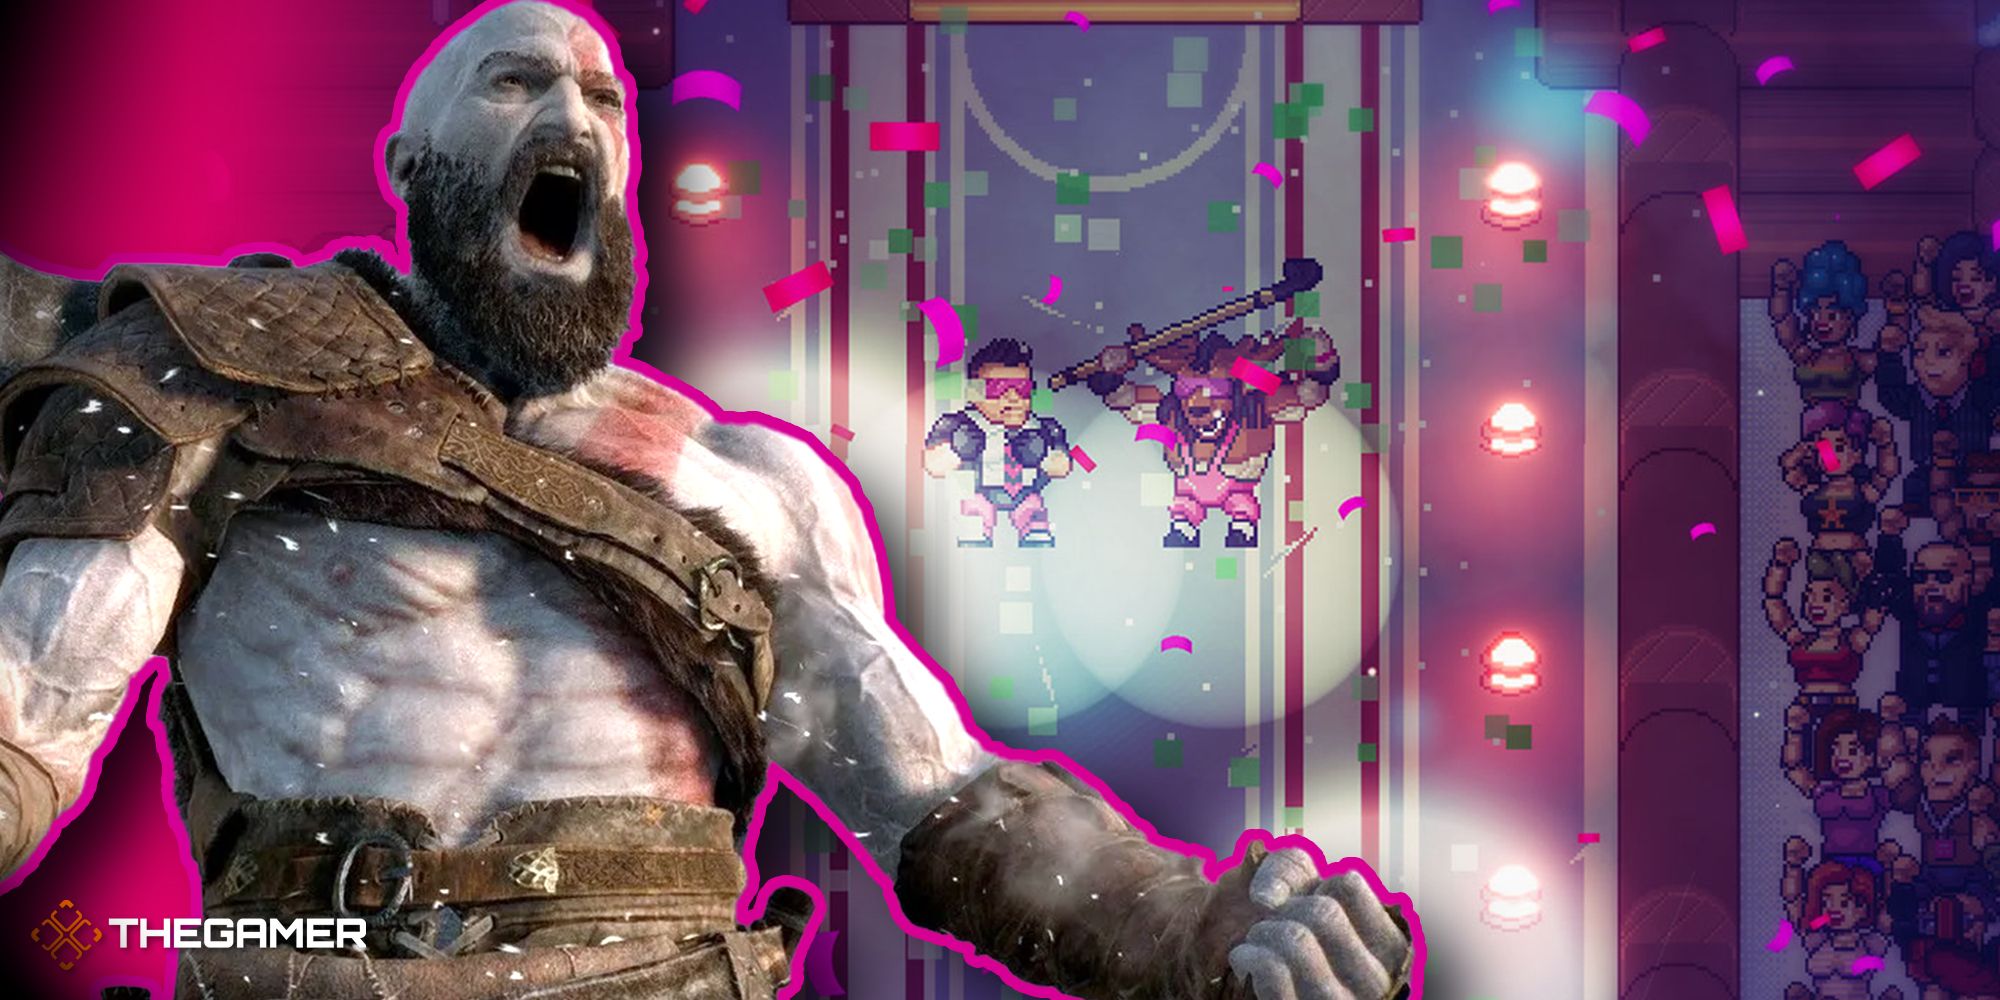 kratos yelling in front of wrestlequest